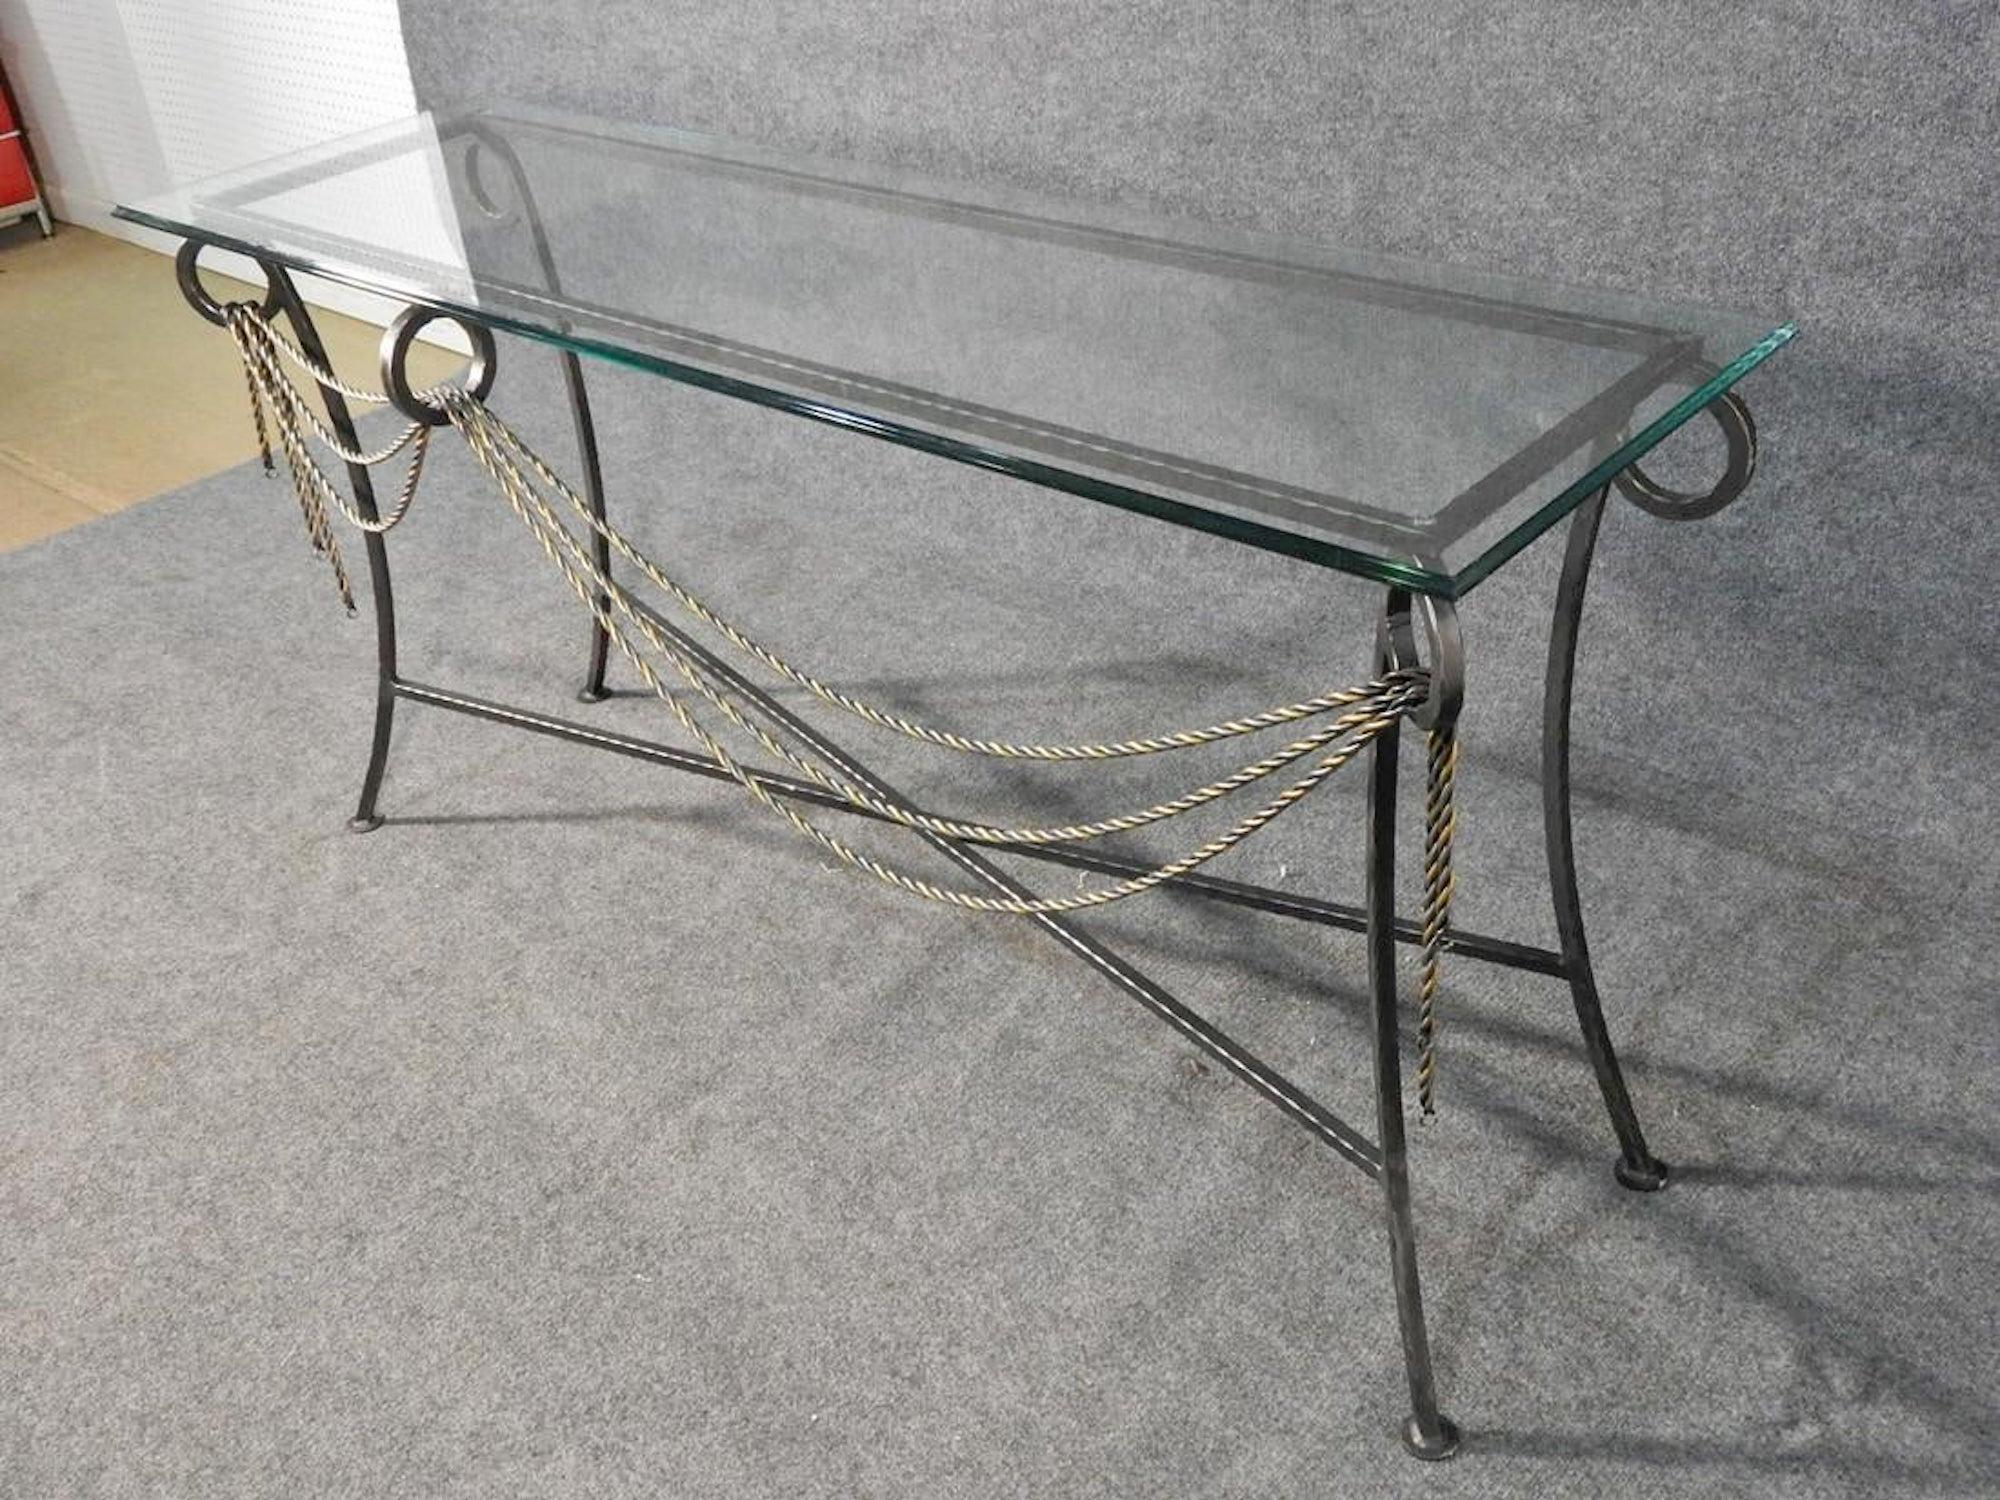 Handsome wrought iron table with glass top and twisted iron accents.
(Please confirm item location - NY or NJ - with dealer).
 